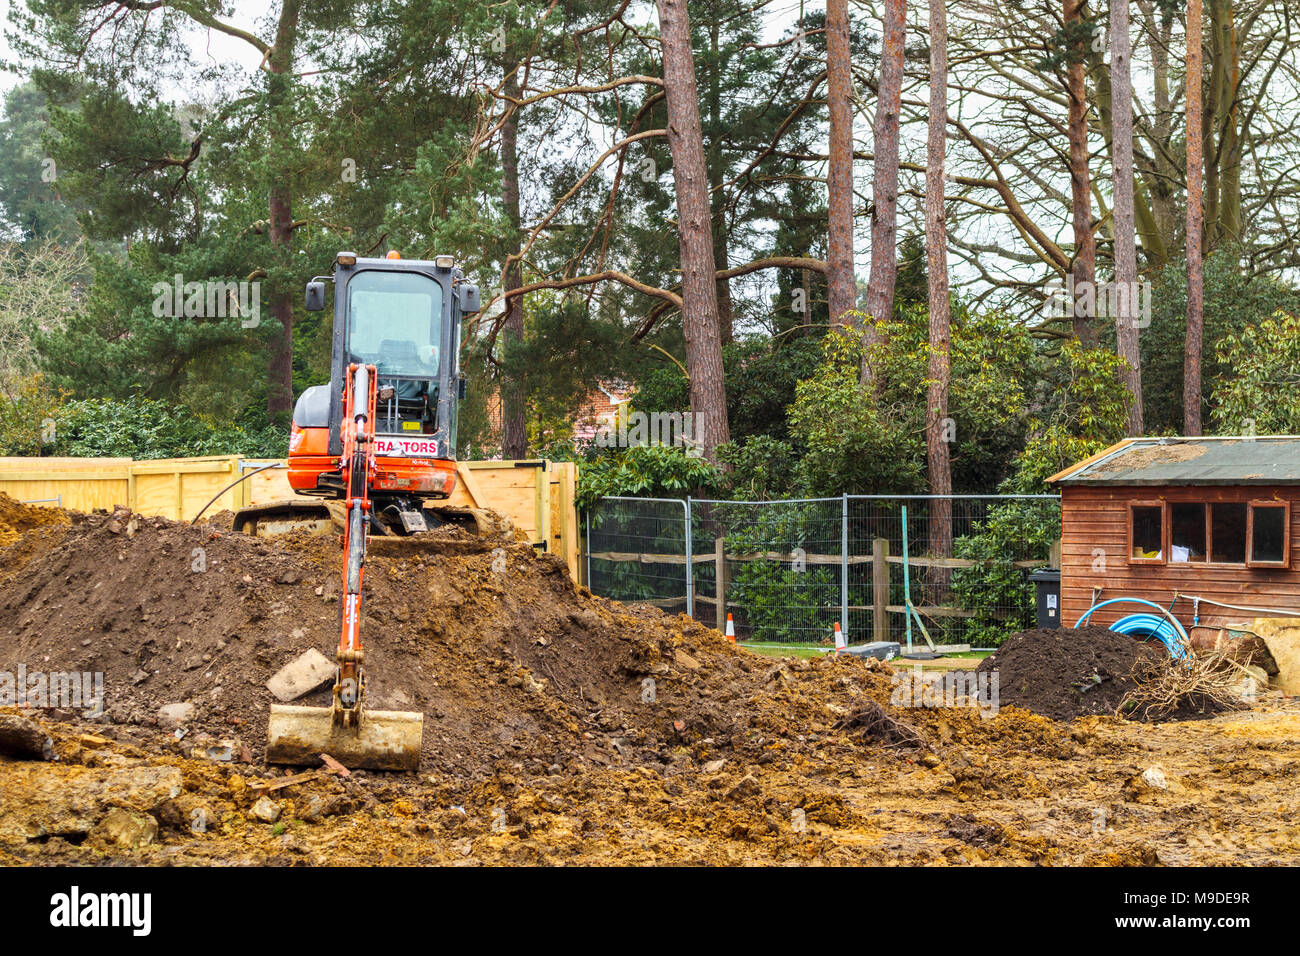 Large orange heavy plant mechanical digger parked on top of a mound of earth on a new suburban residential development construction site Stock Photo